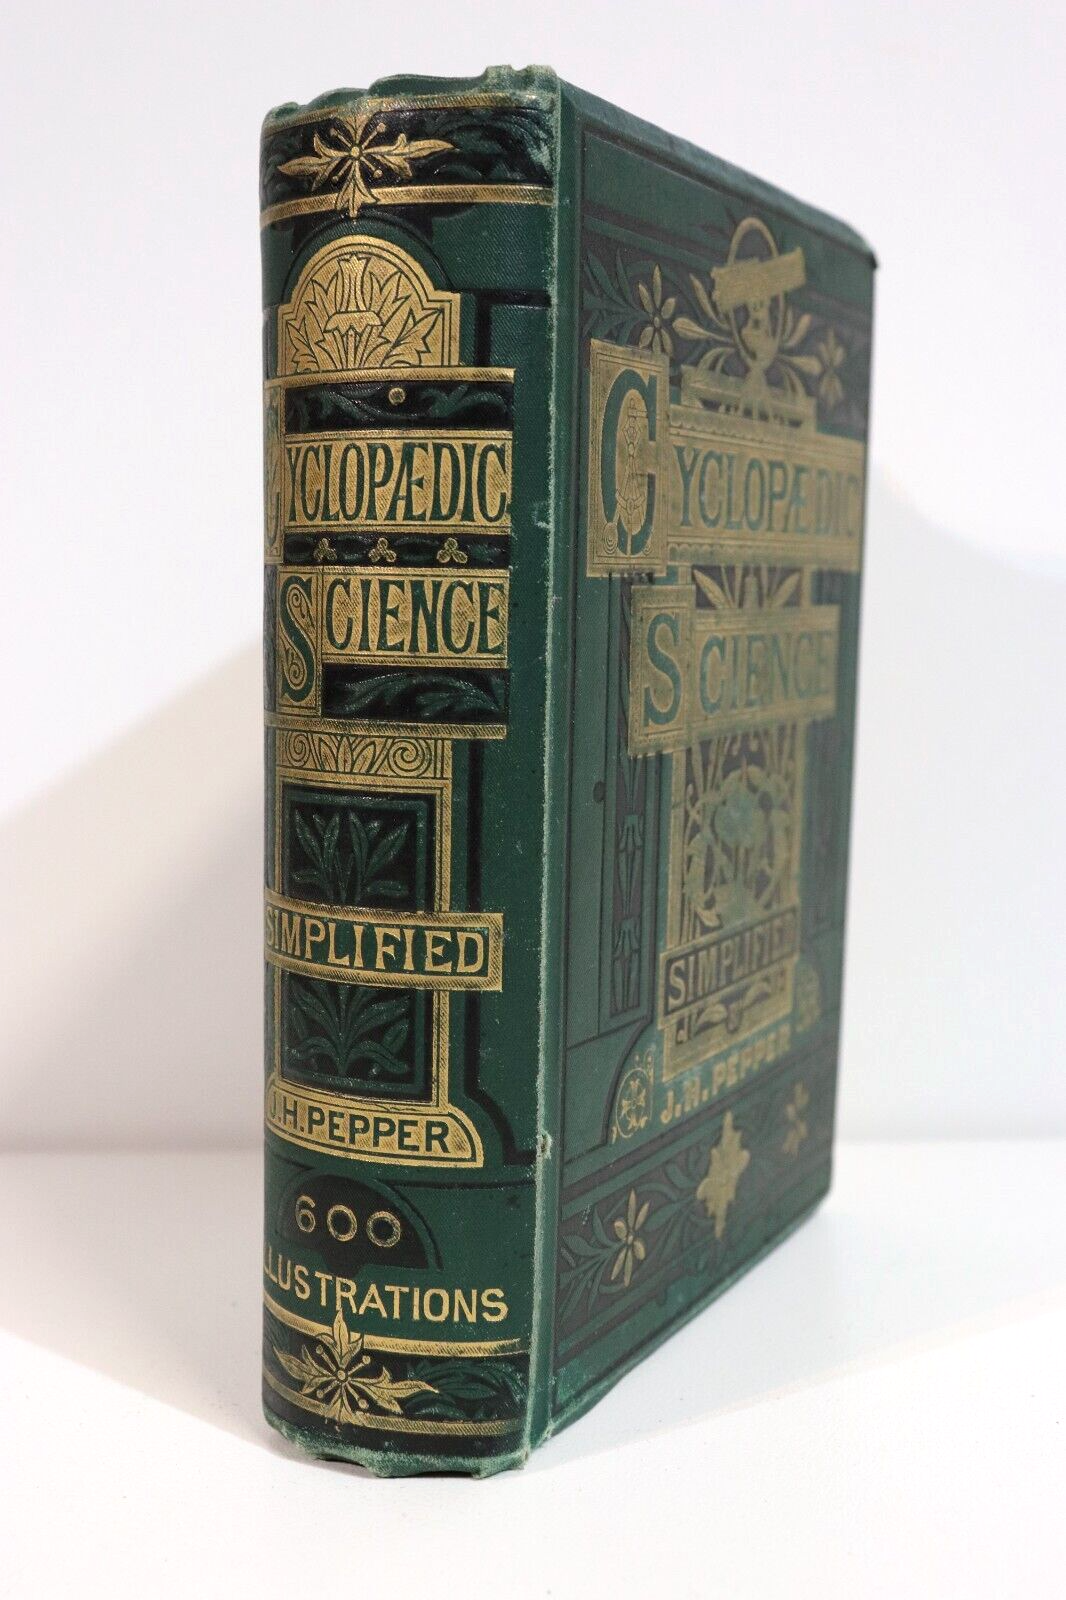 Cyclopaedic Science Simplified by J.H. Pepper - c1875 - Antique Science Book